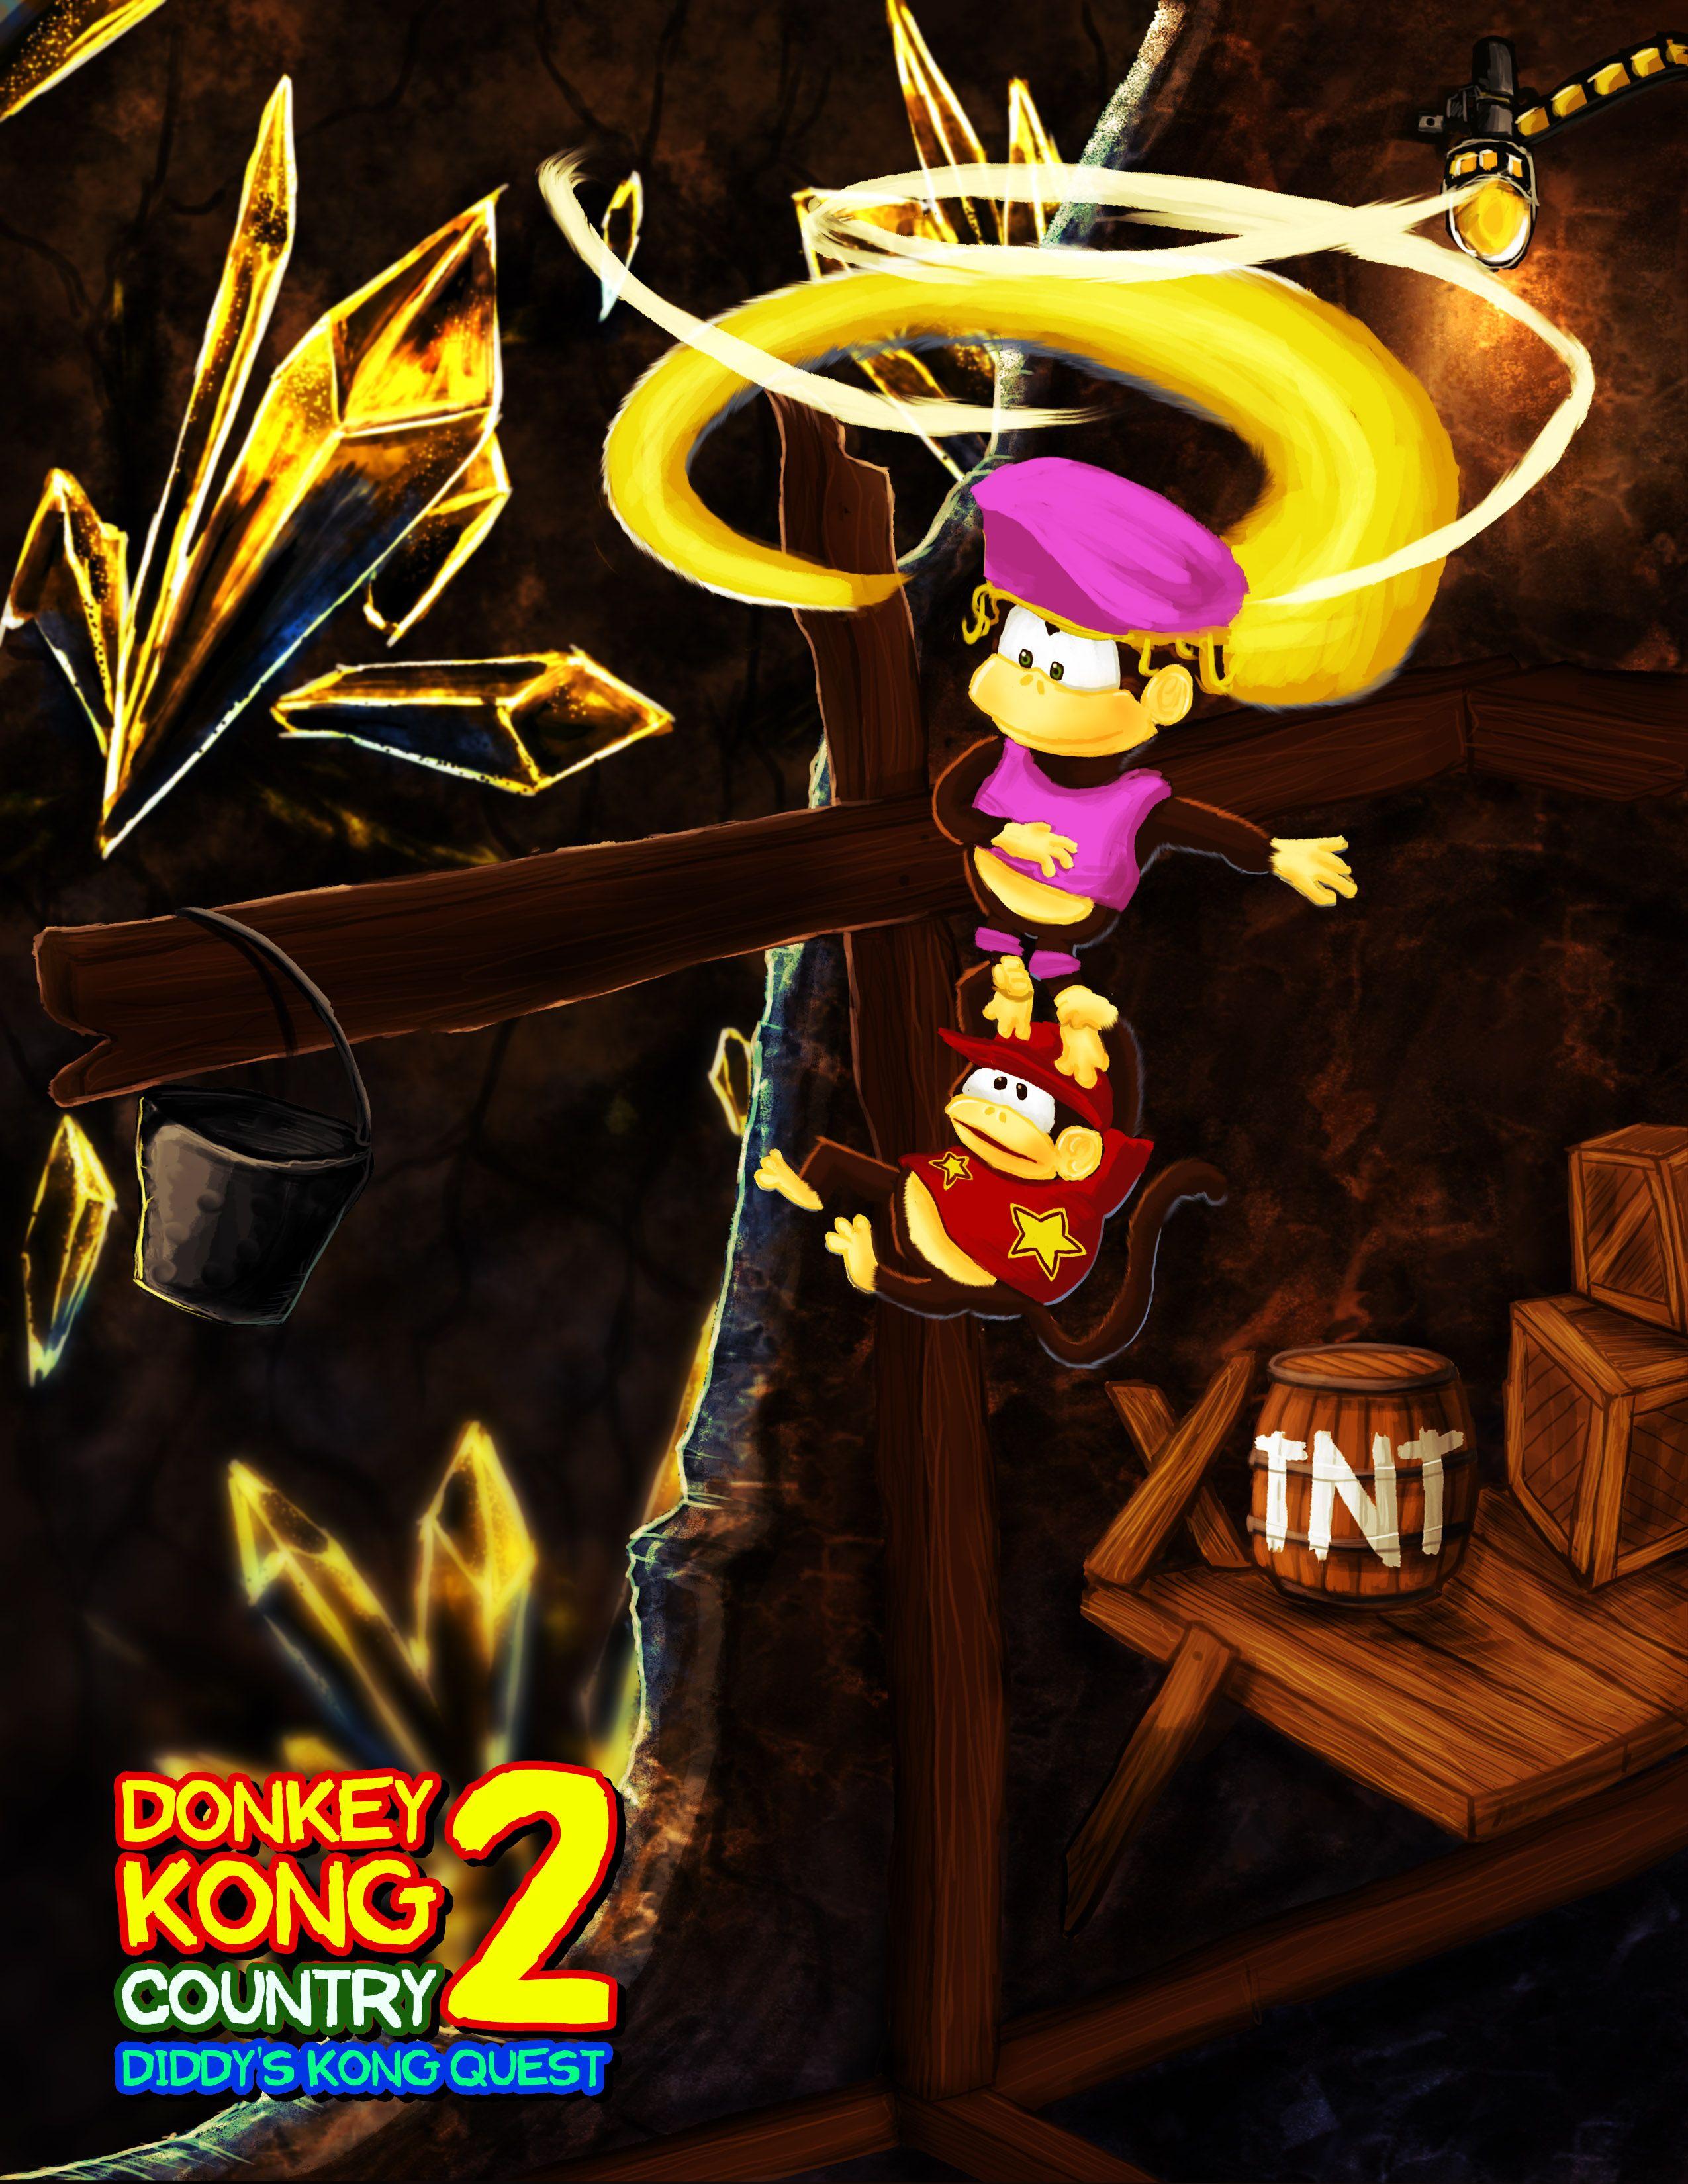 Donkey kong country 2 poster